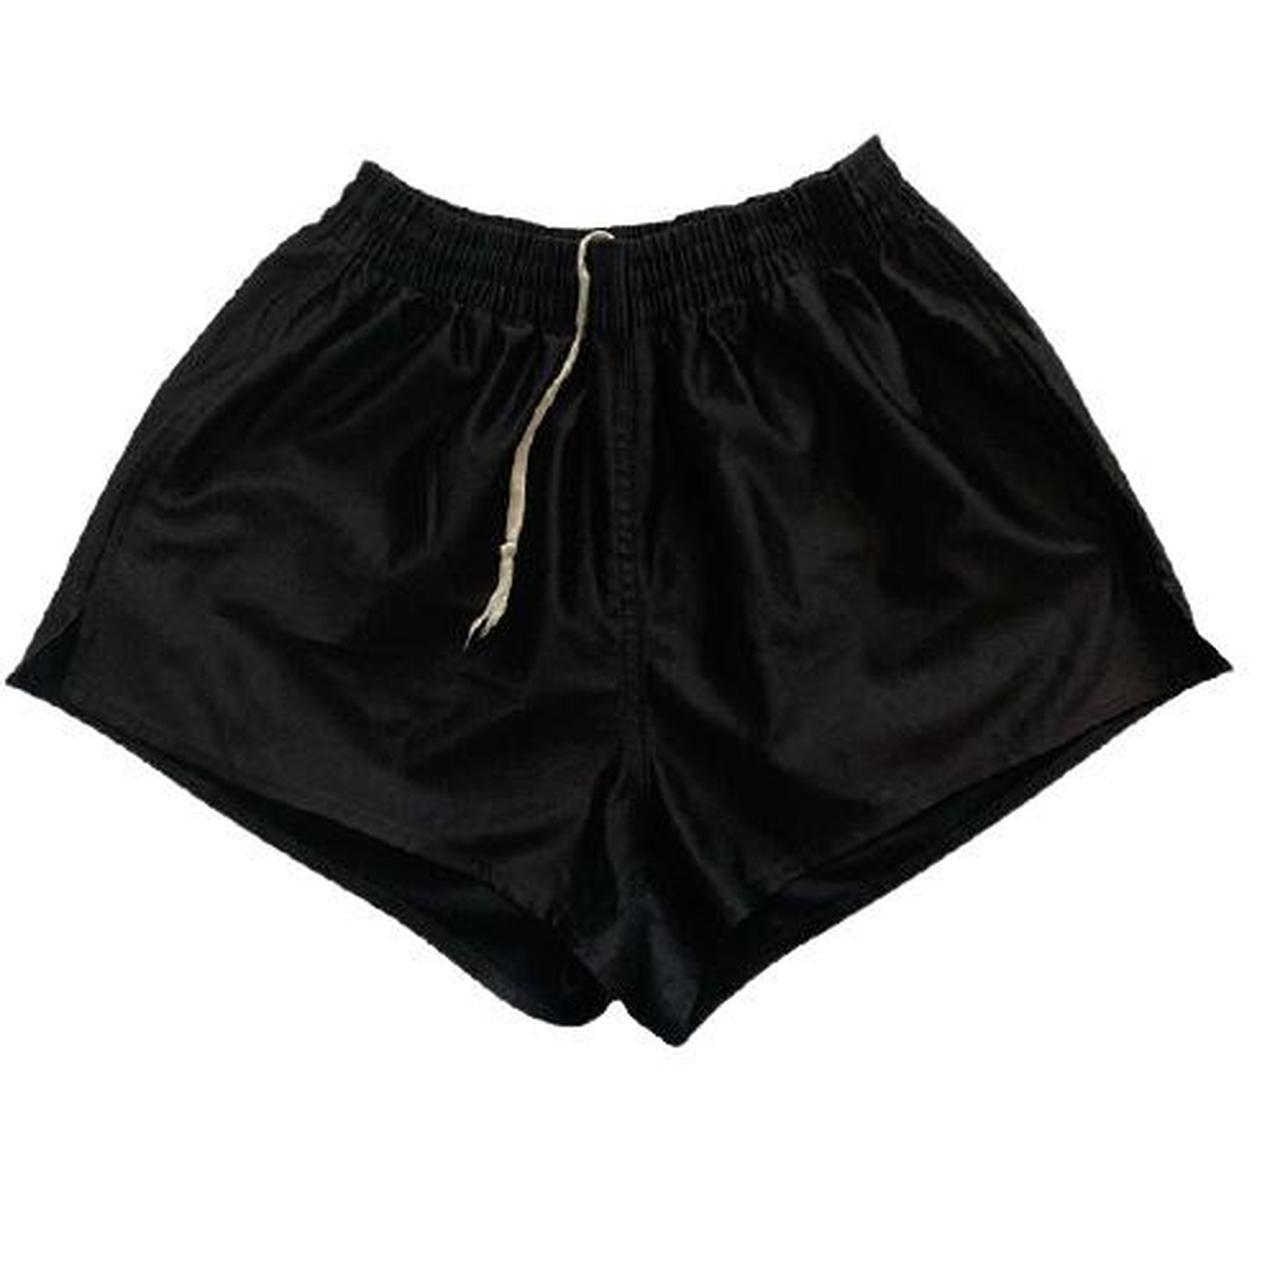 Product Image 1 - Vintage shorts in black by